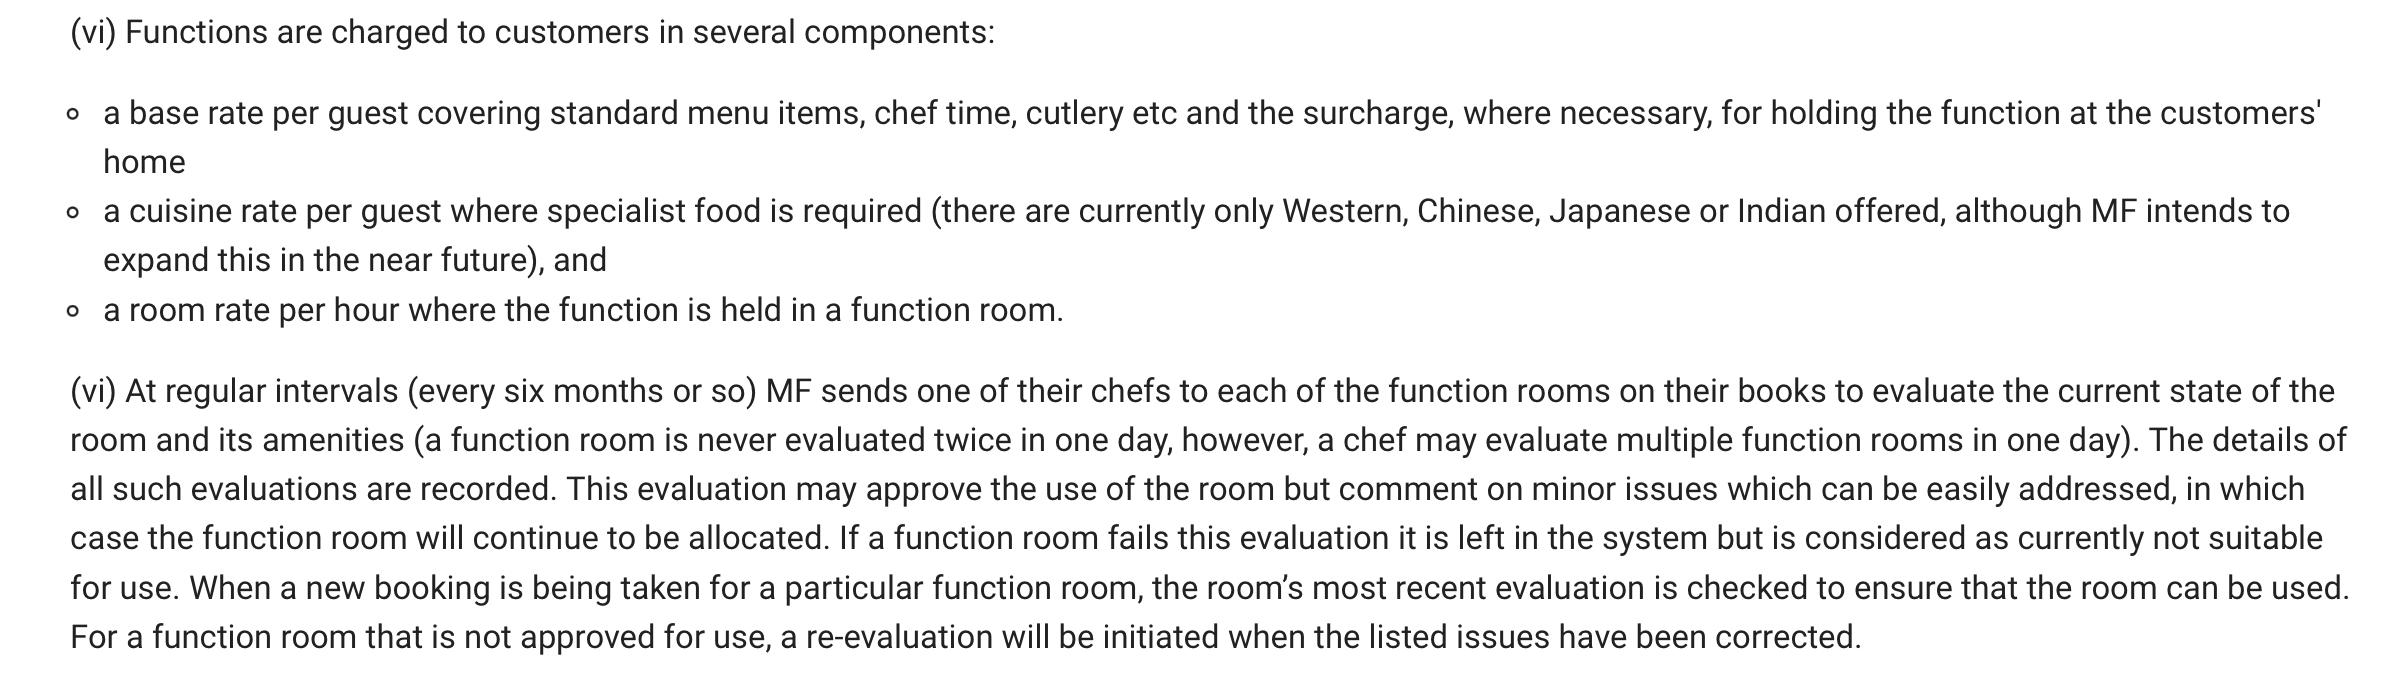 (vi) Functions are charged to customers in several components: O a base rate per guest covering standard menu